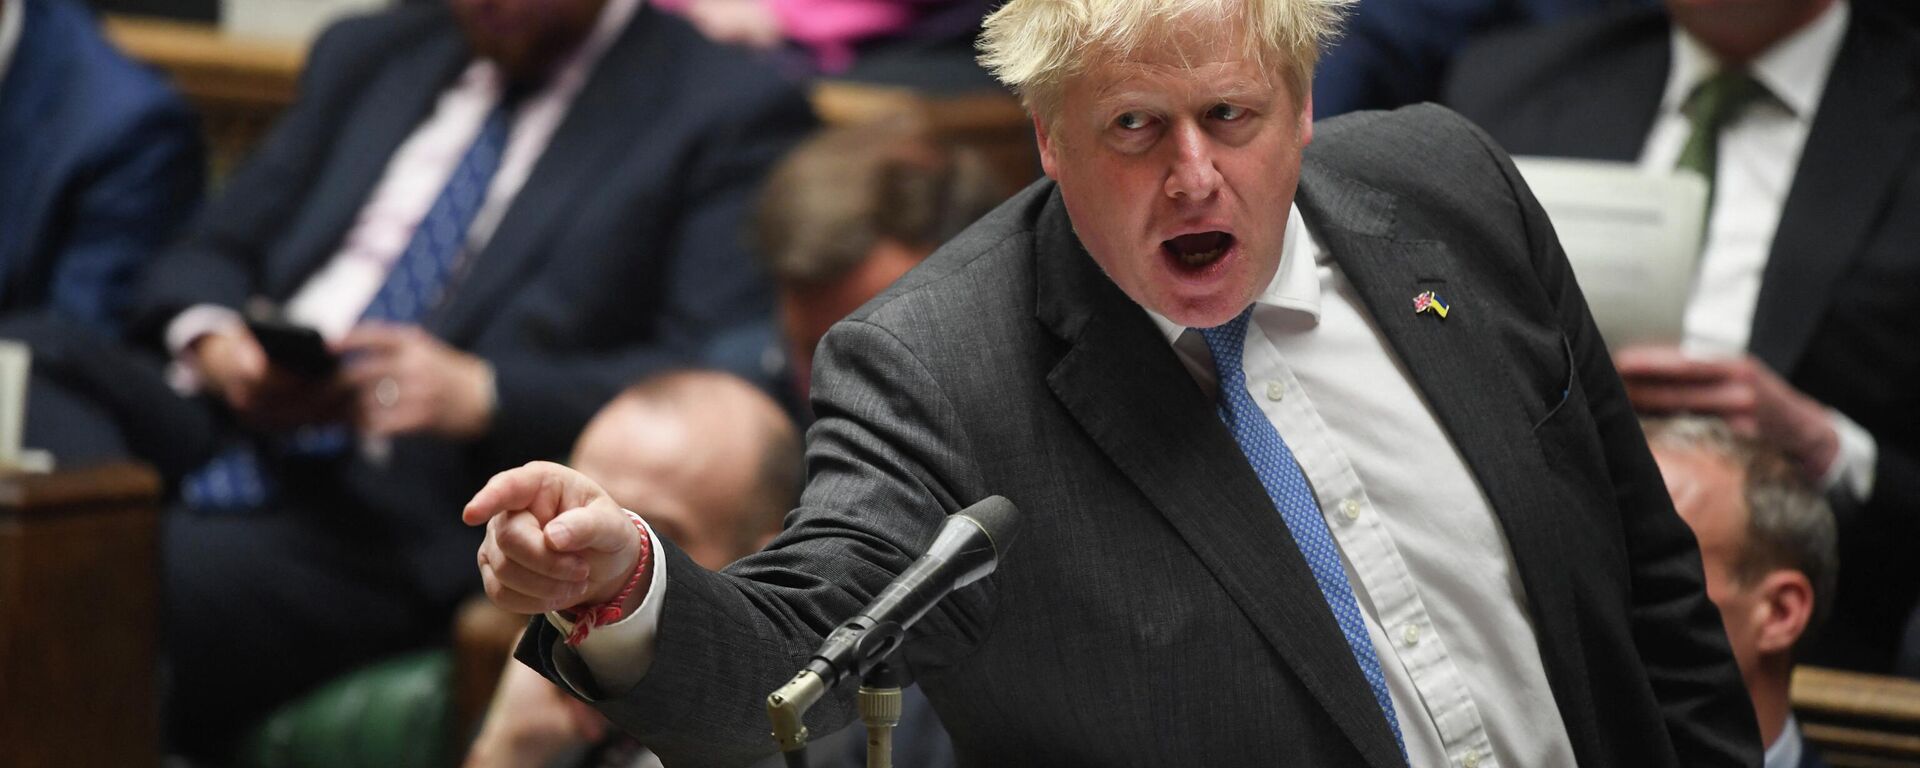 A handout photograph released by the UK Parliament shows Britain's Prime Minister Boris Johnson gesturing and speaking during during the Prime Minister's Questions (PMQ) session, in the House of Commons, in London, on April 27, 2022 - Sputnik International, 1920, 30.04.2022